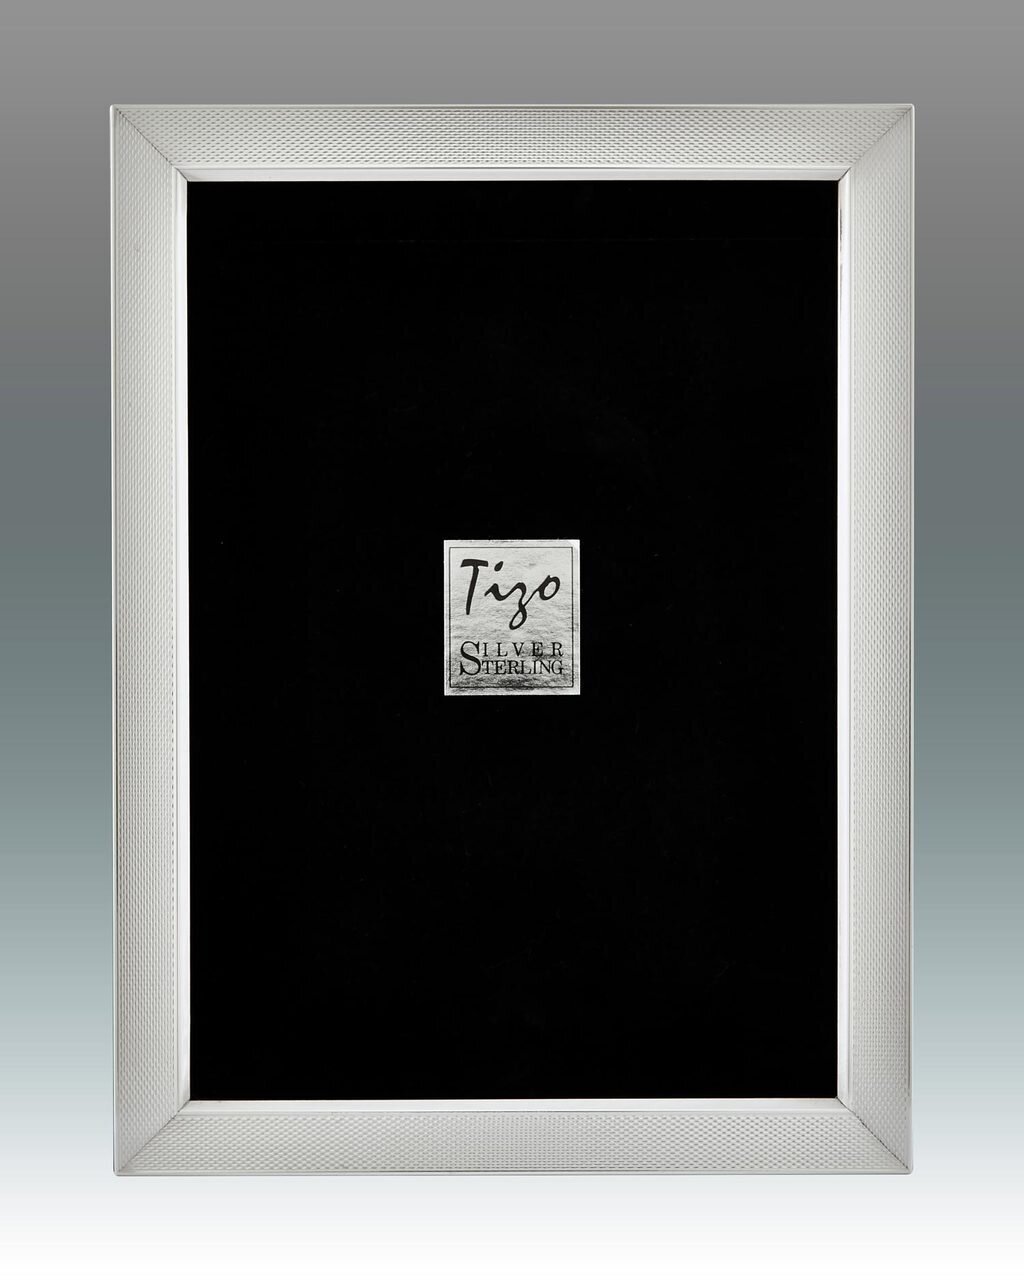 Tizo Silky Roads Sterling Silver Picture Frame 4 x 6 Inch